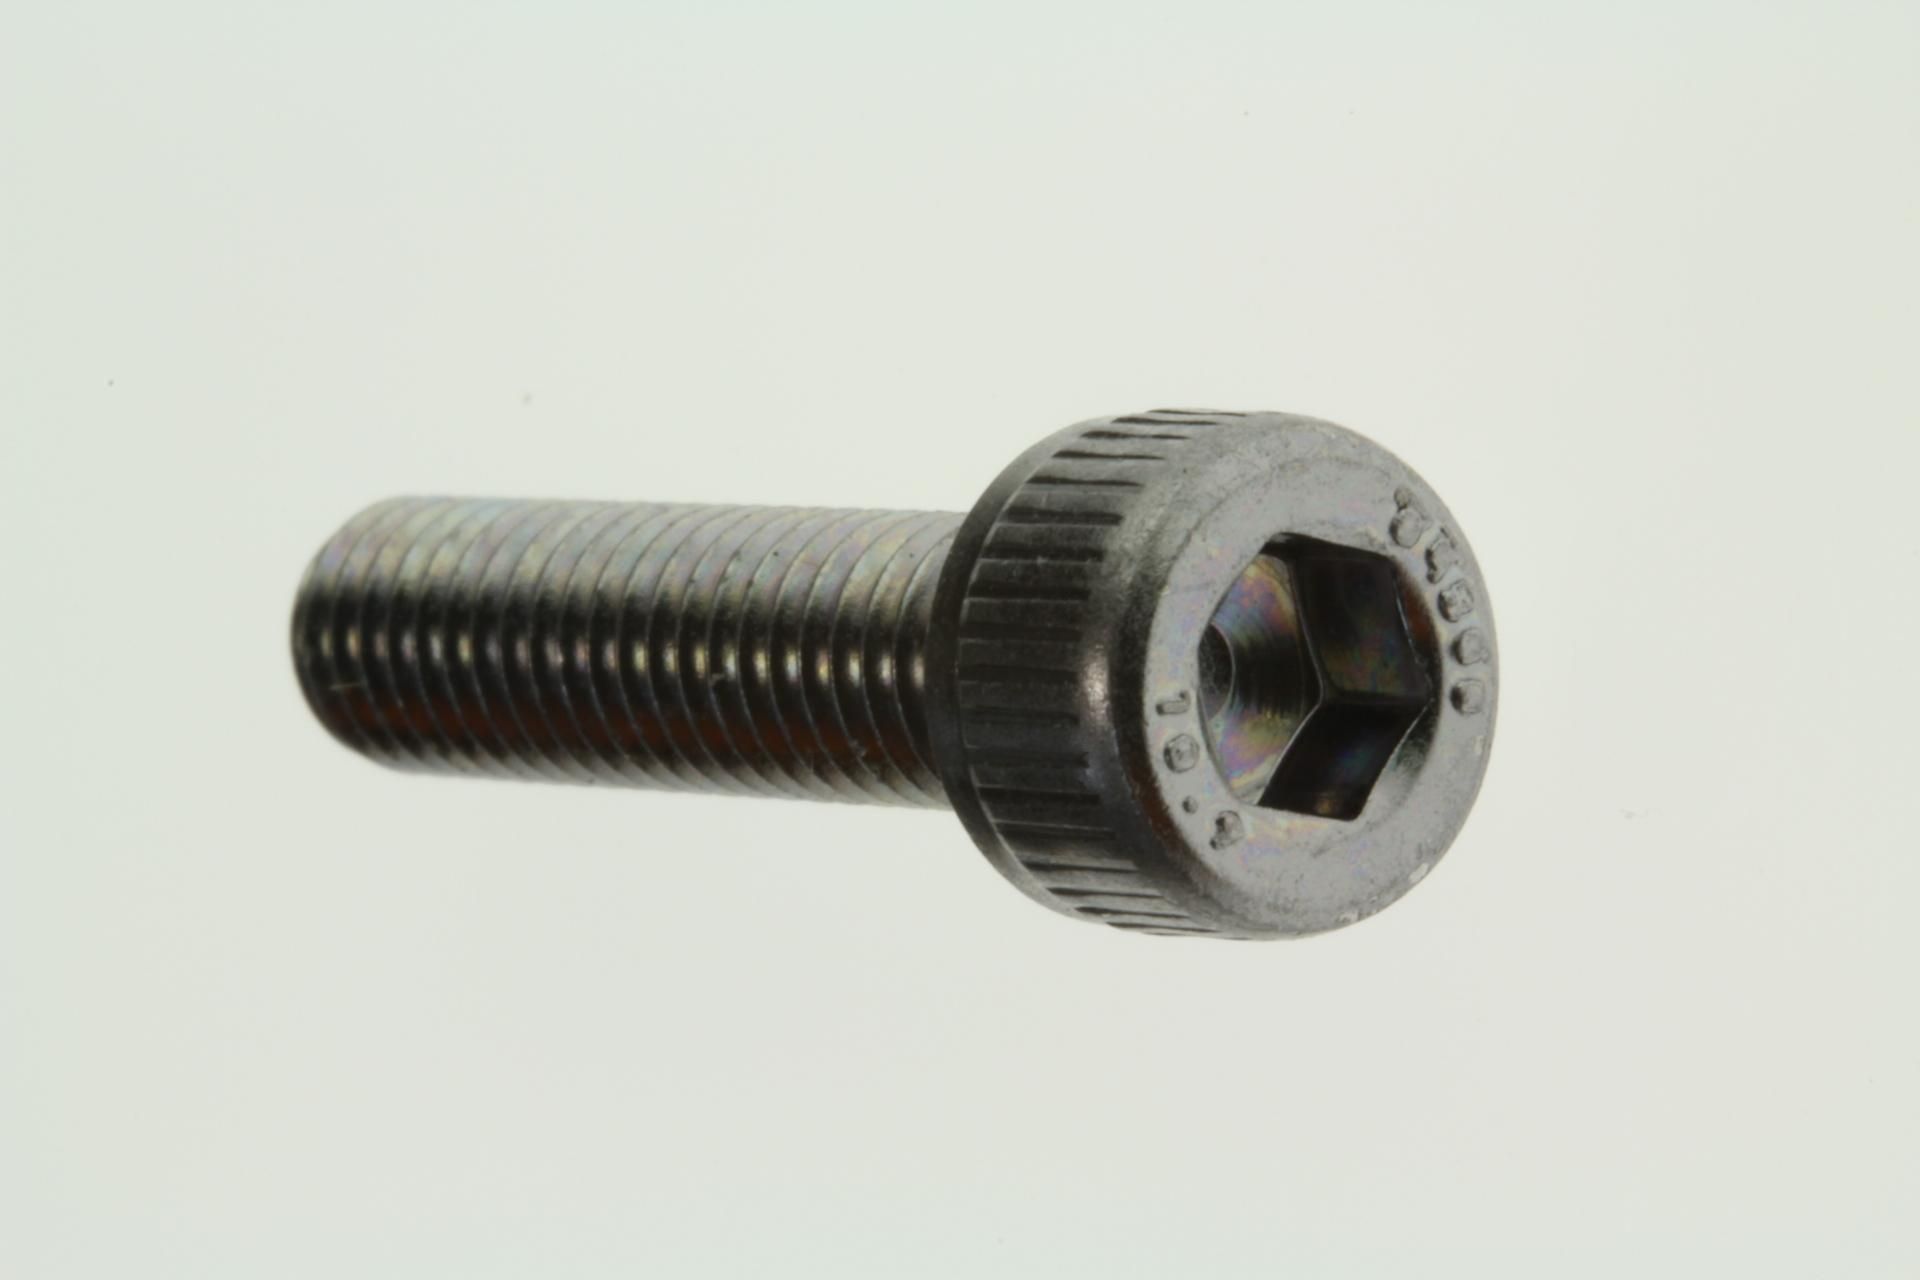 91311-06025-00 Superseded by 91314-06025-00 - BOLT (3DM)